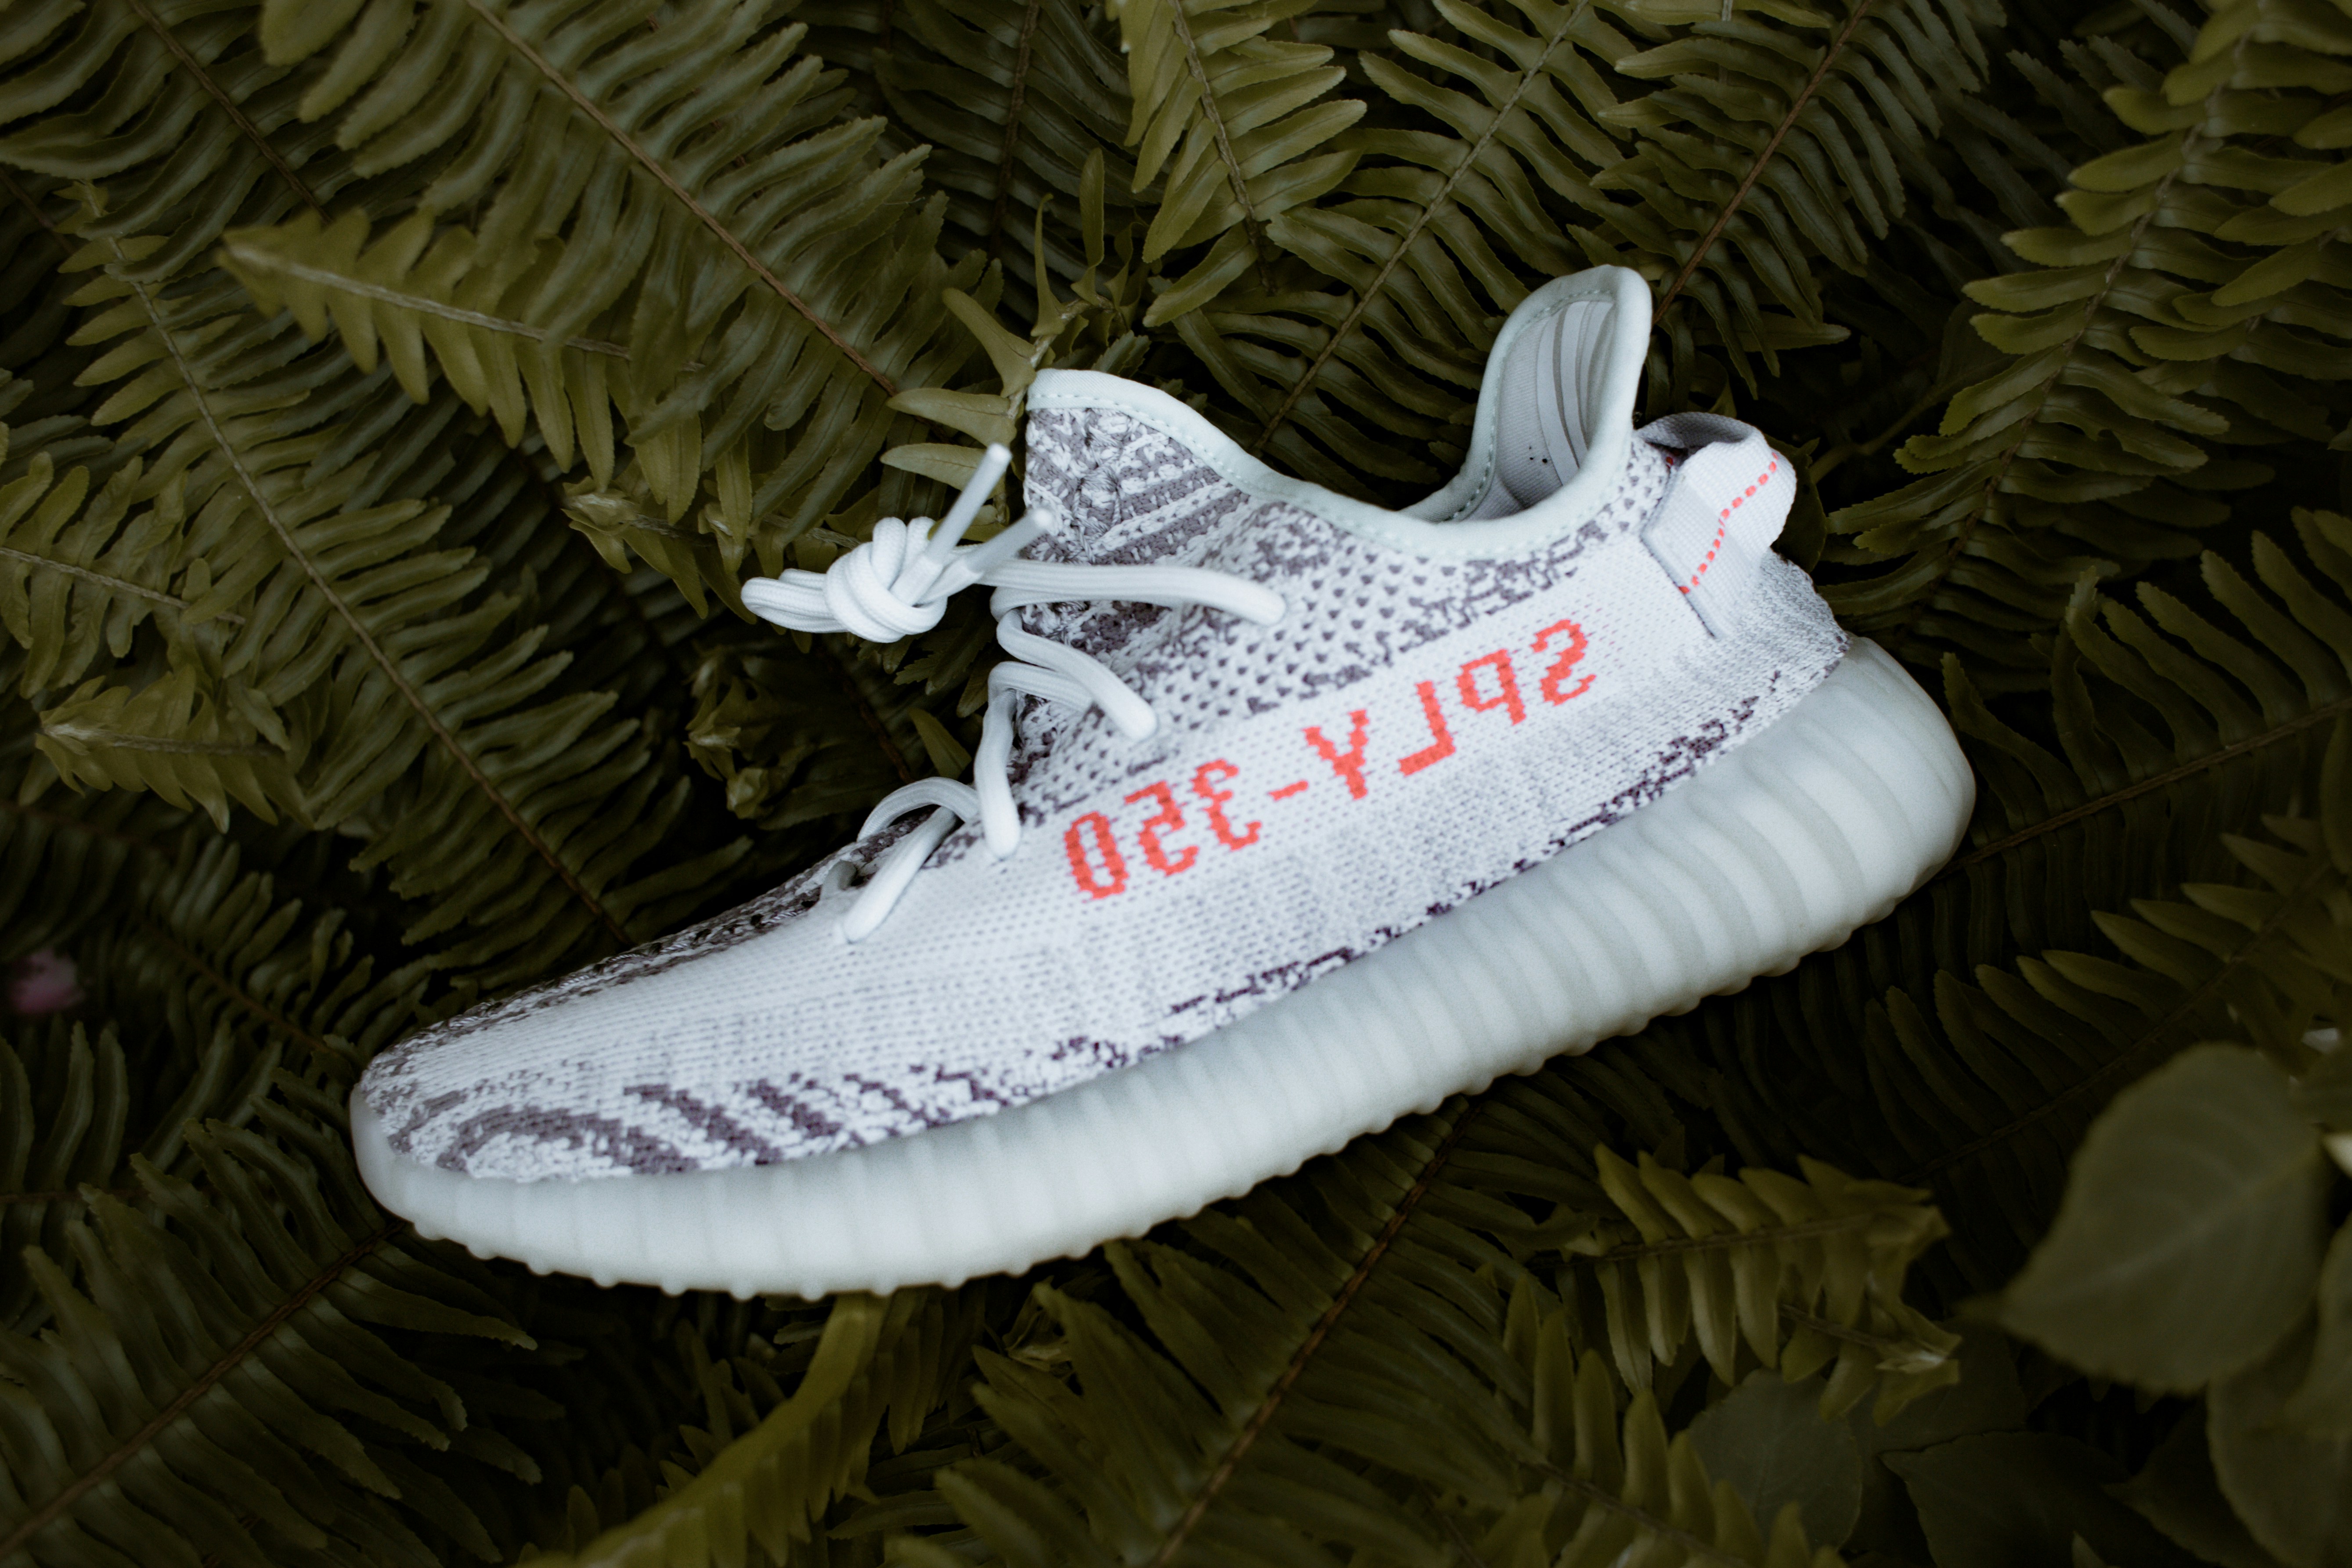 yeezy sply 350 black and white